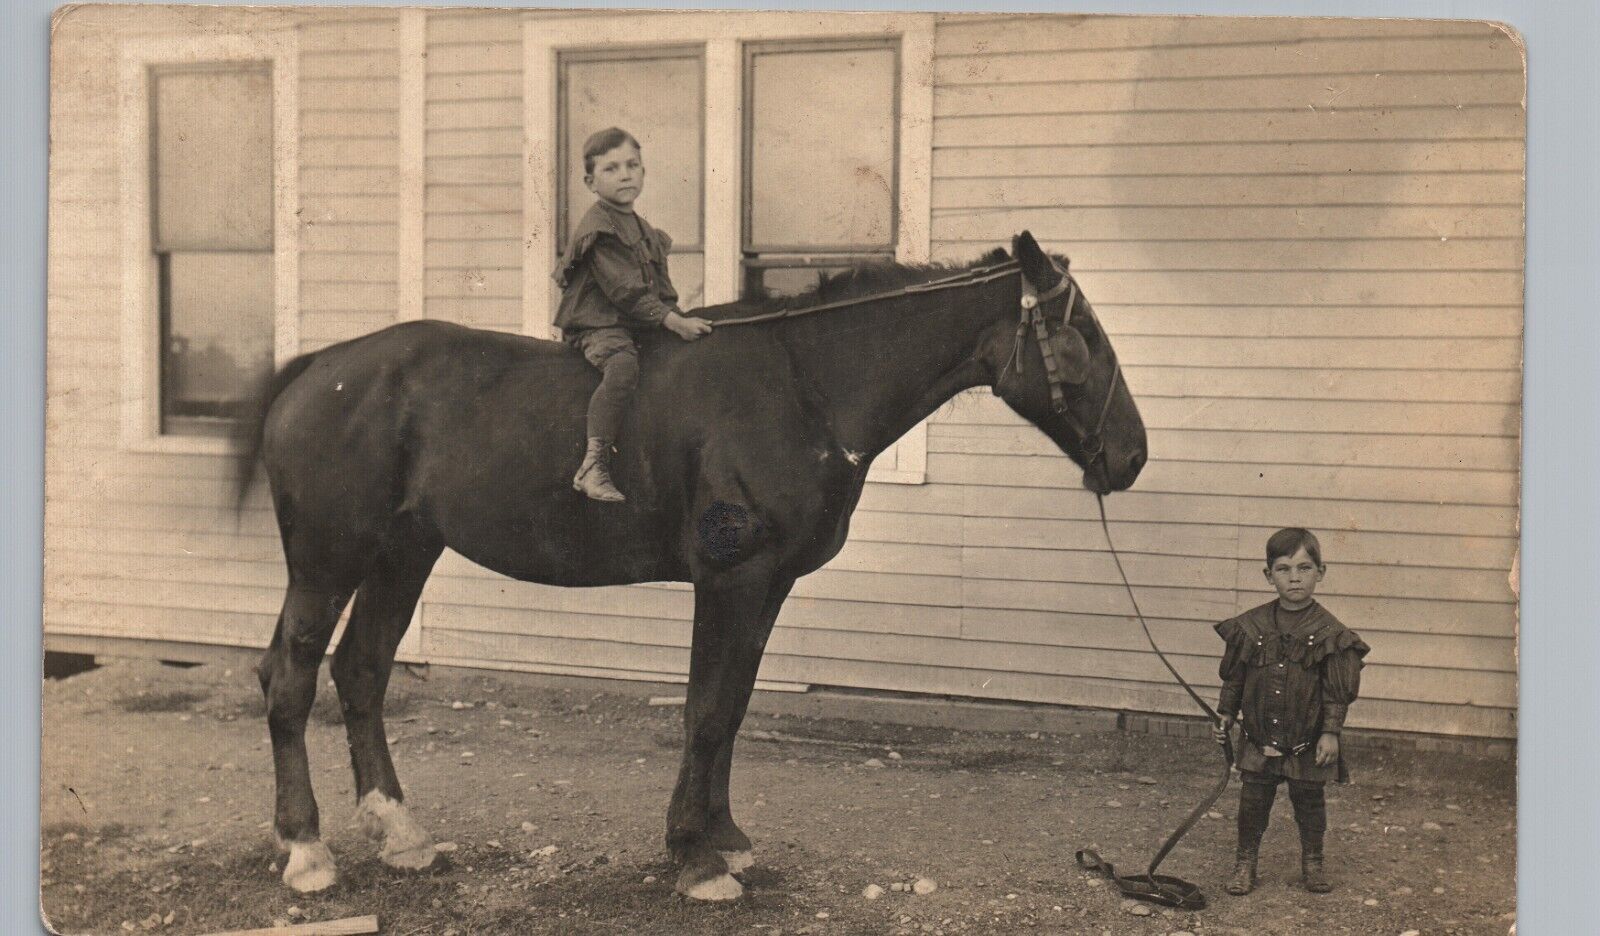 LITTLE BOY TOWING A HORSE real photo postcard rppc candid portrait brothers